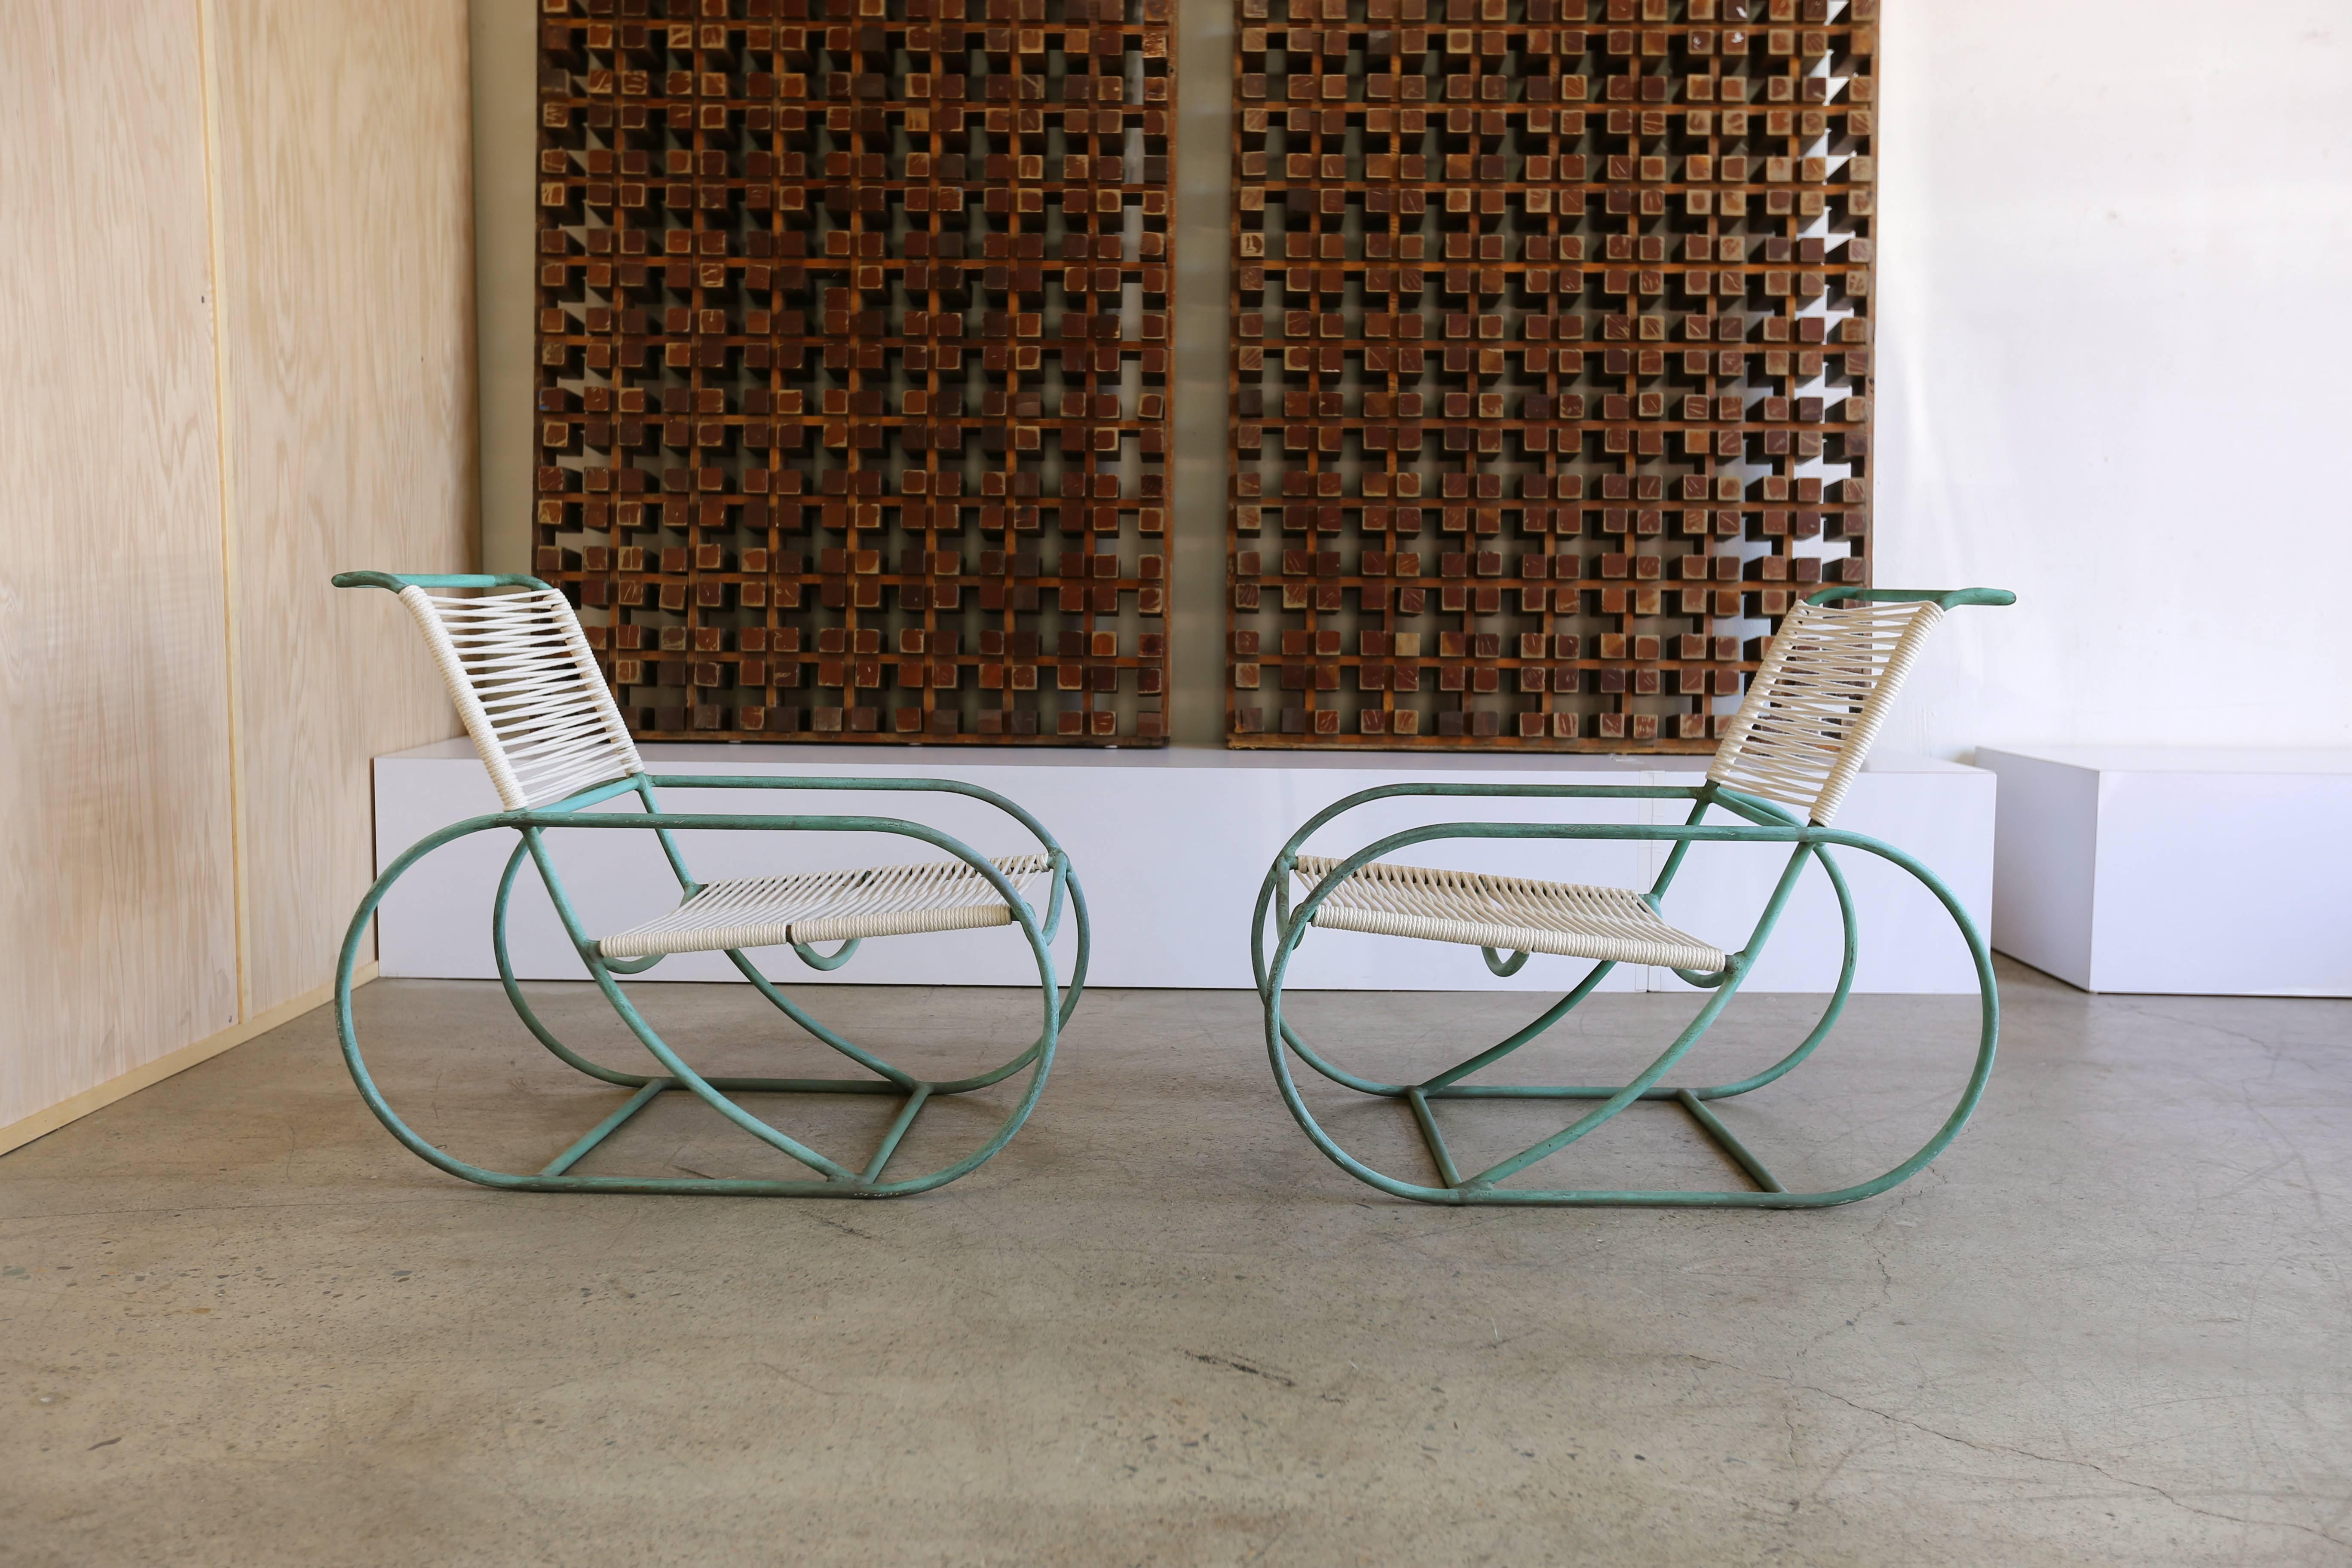 Pair of lounge chairs by Kipp Stewart for Terra.